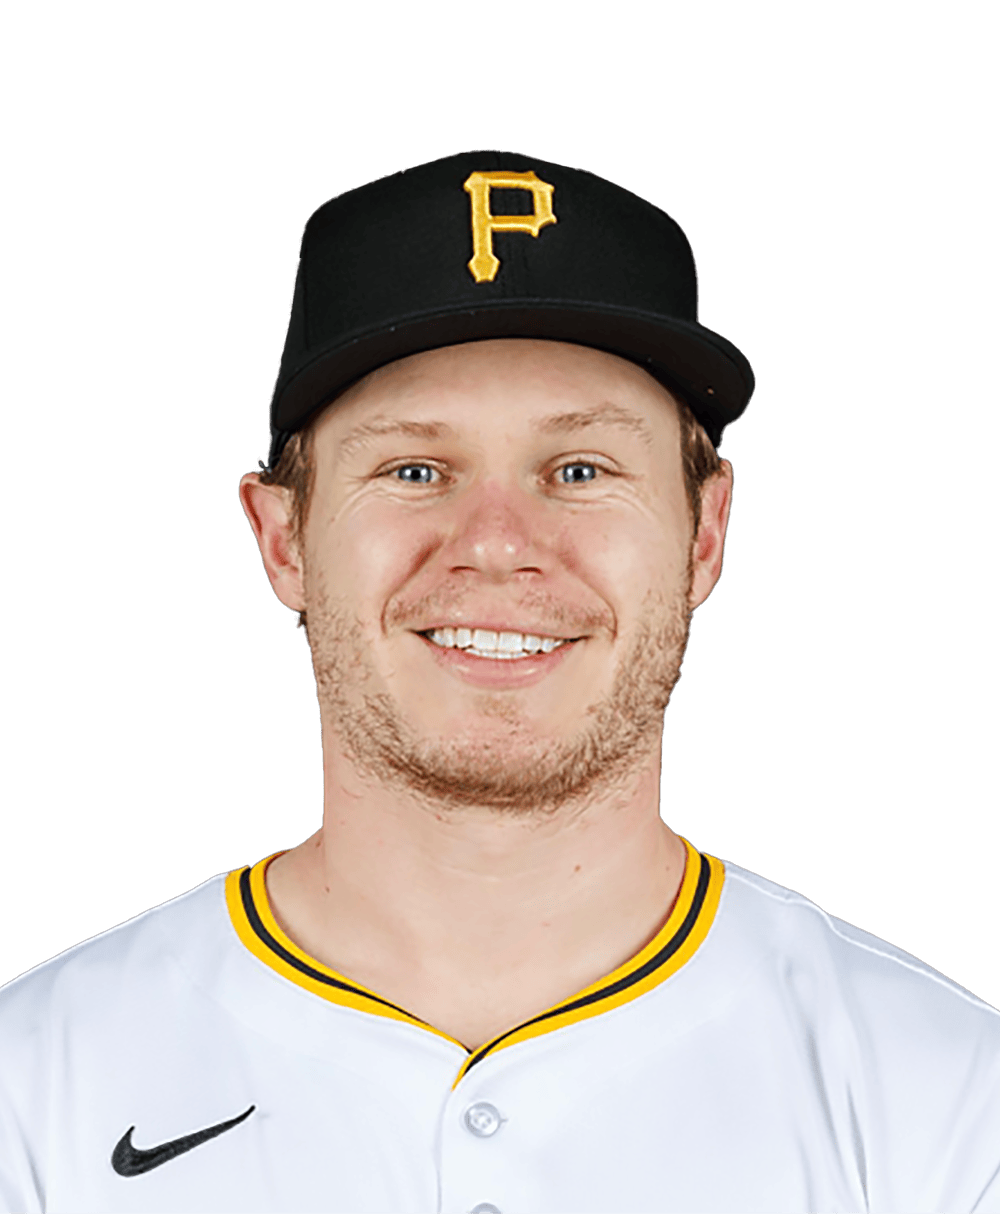 Joe, Suwinski hit back-to-back HRs in Pirates' win over Reds